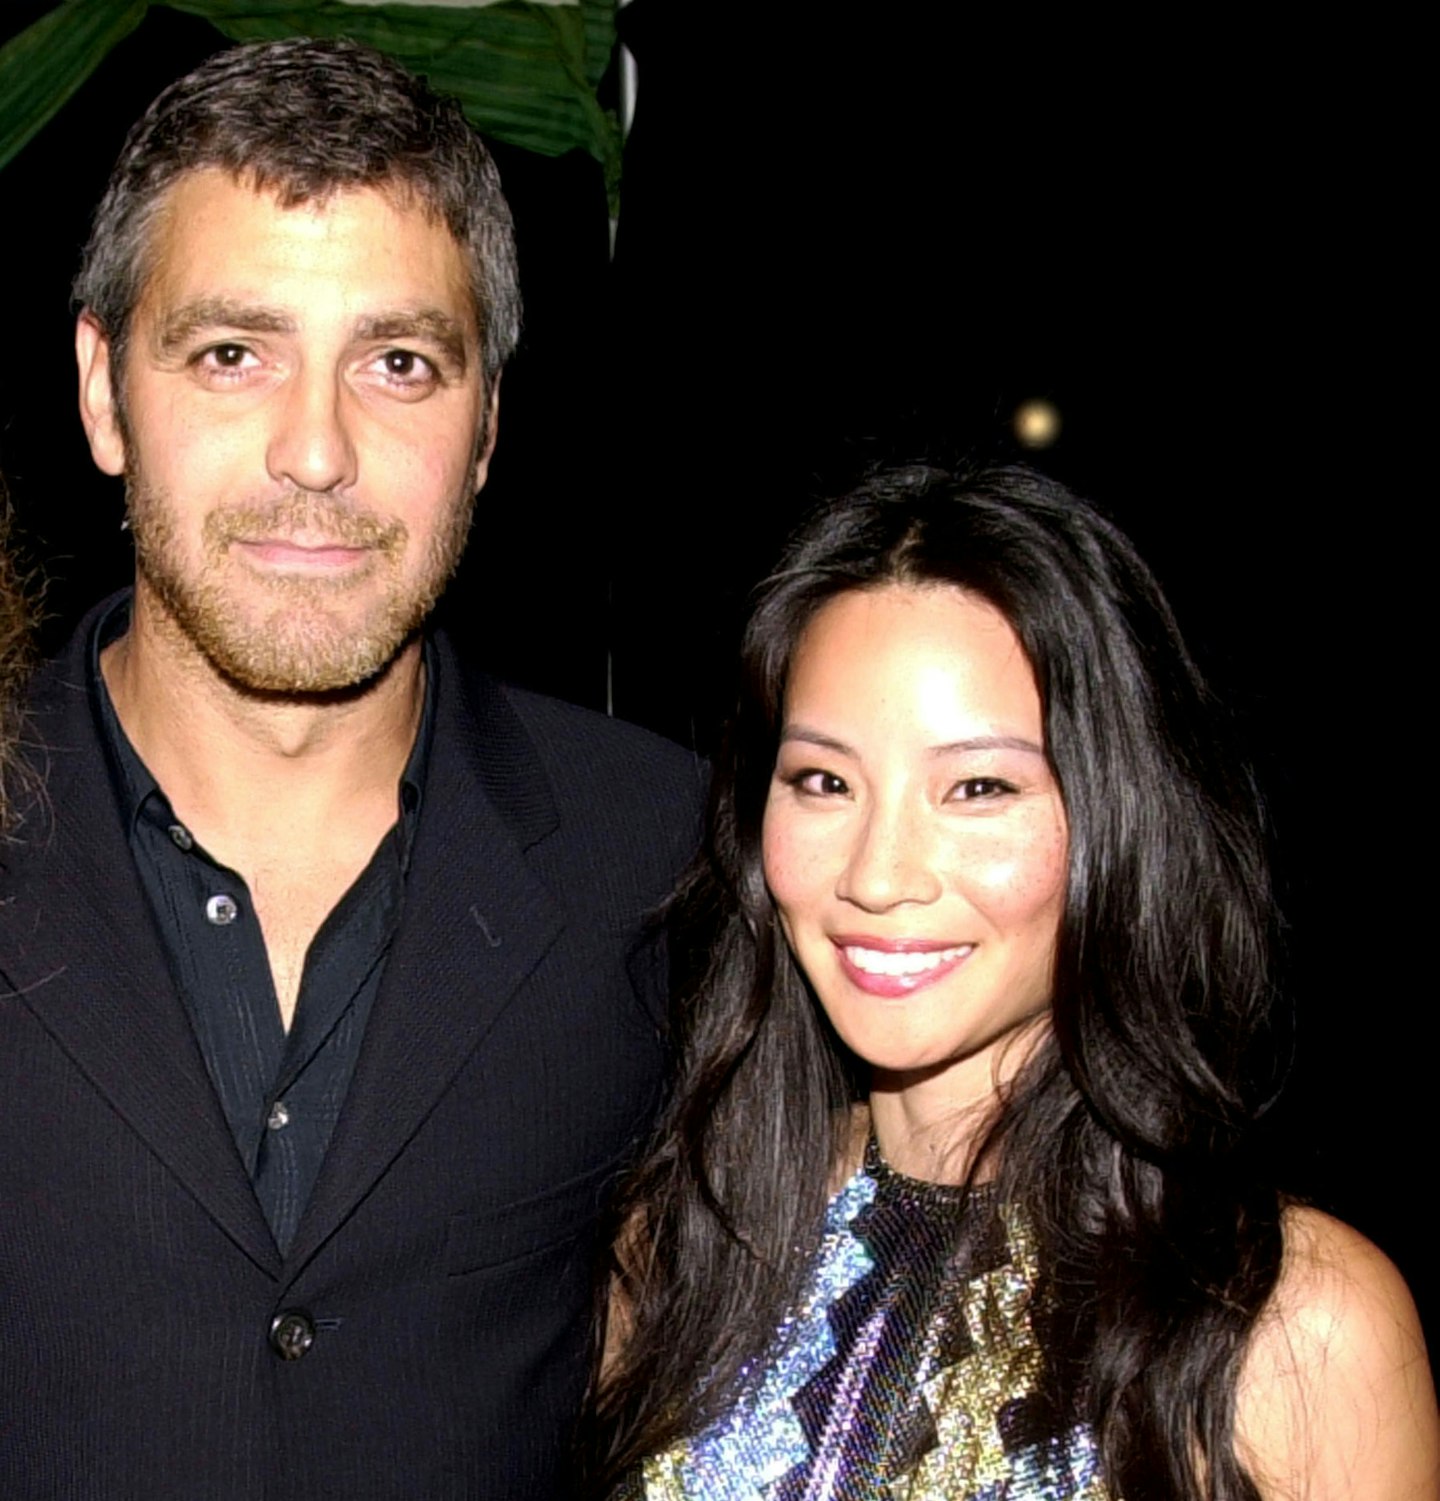 George Clooney and Lucy Liu